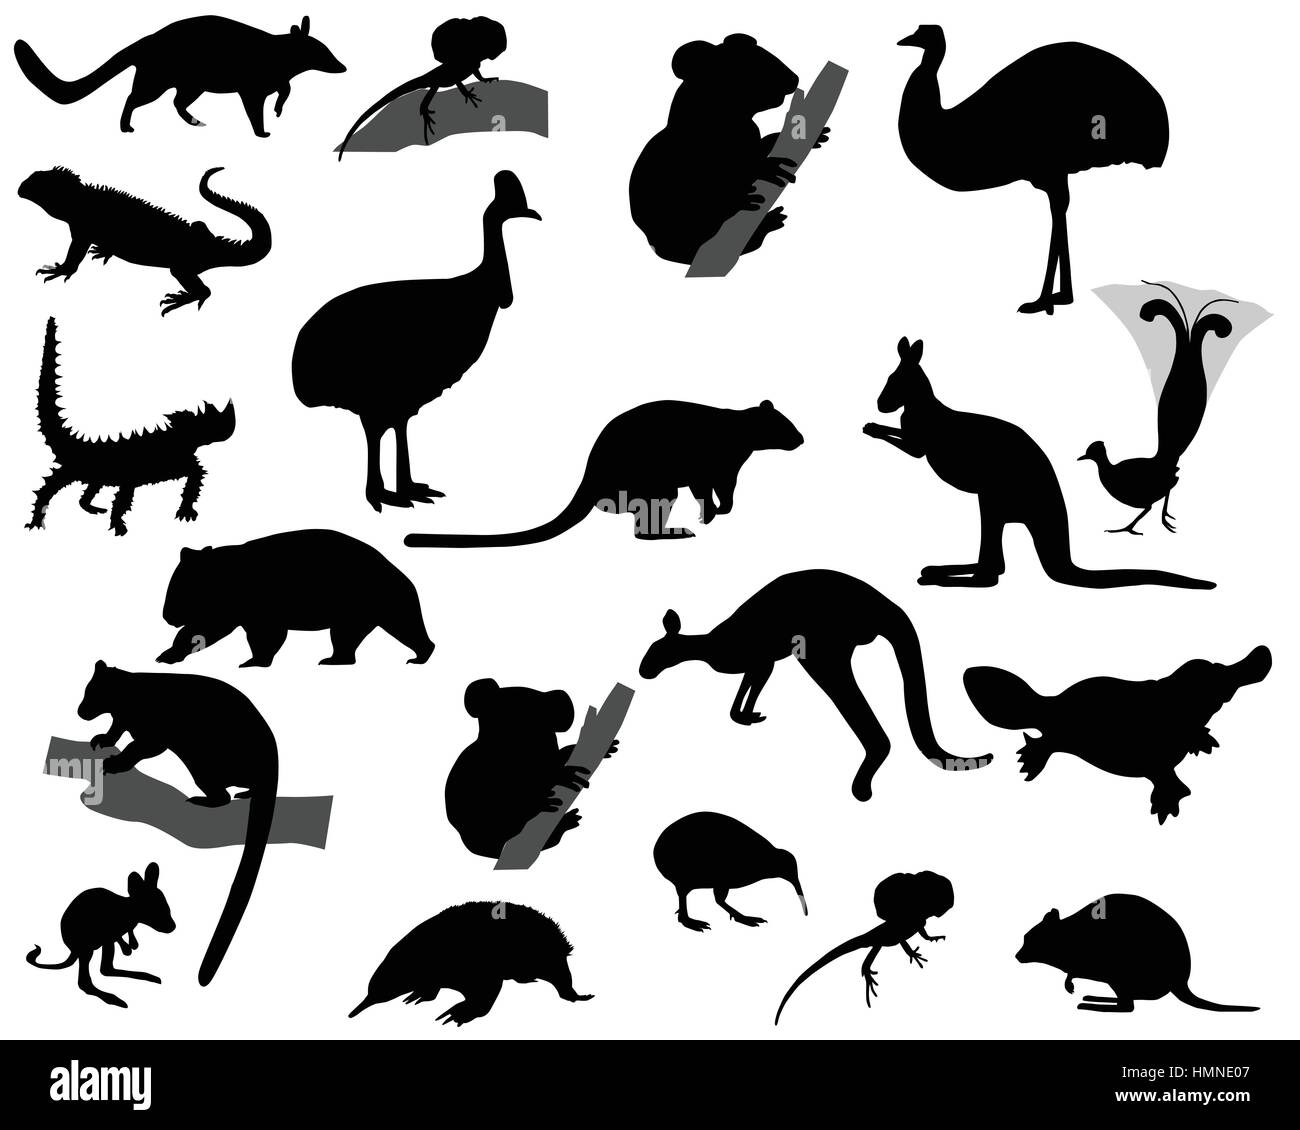 Collection of silhouettes of animals living in the territory of Australia Stock Vector